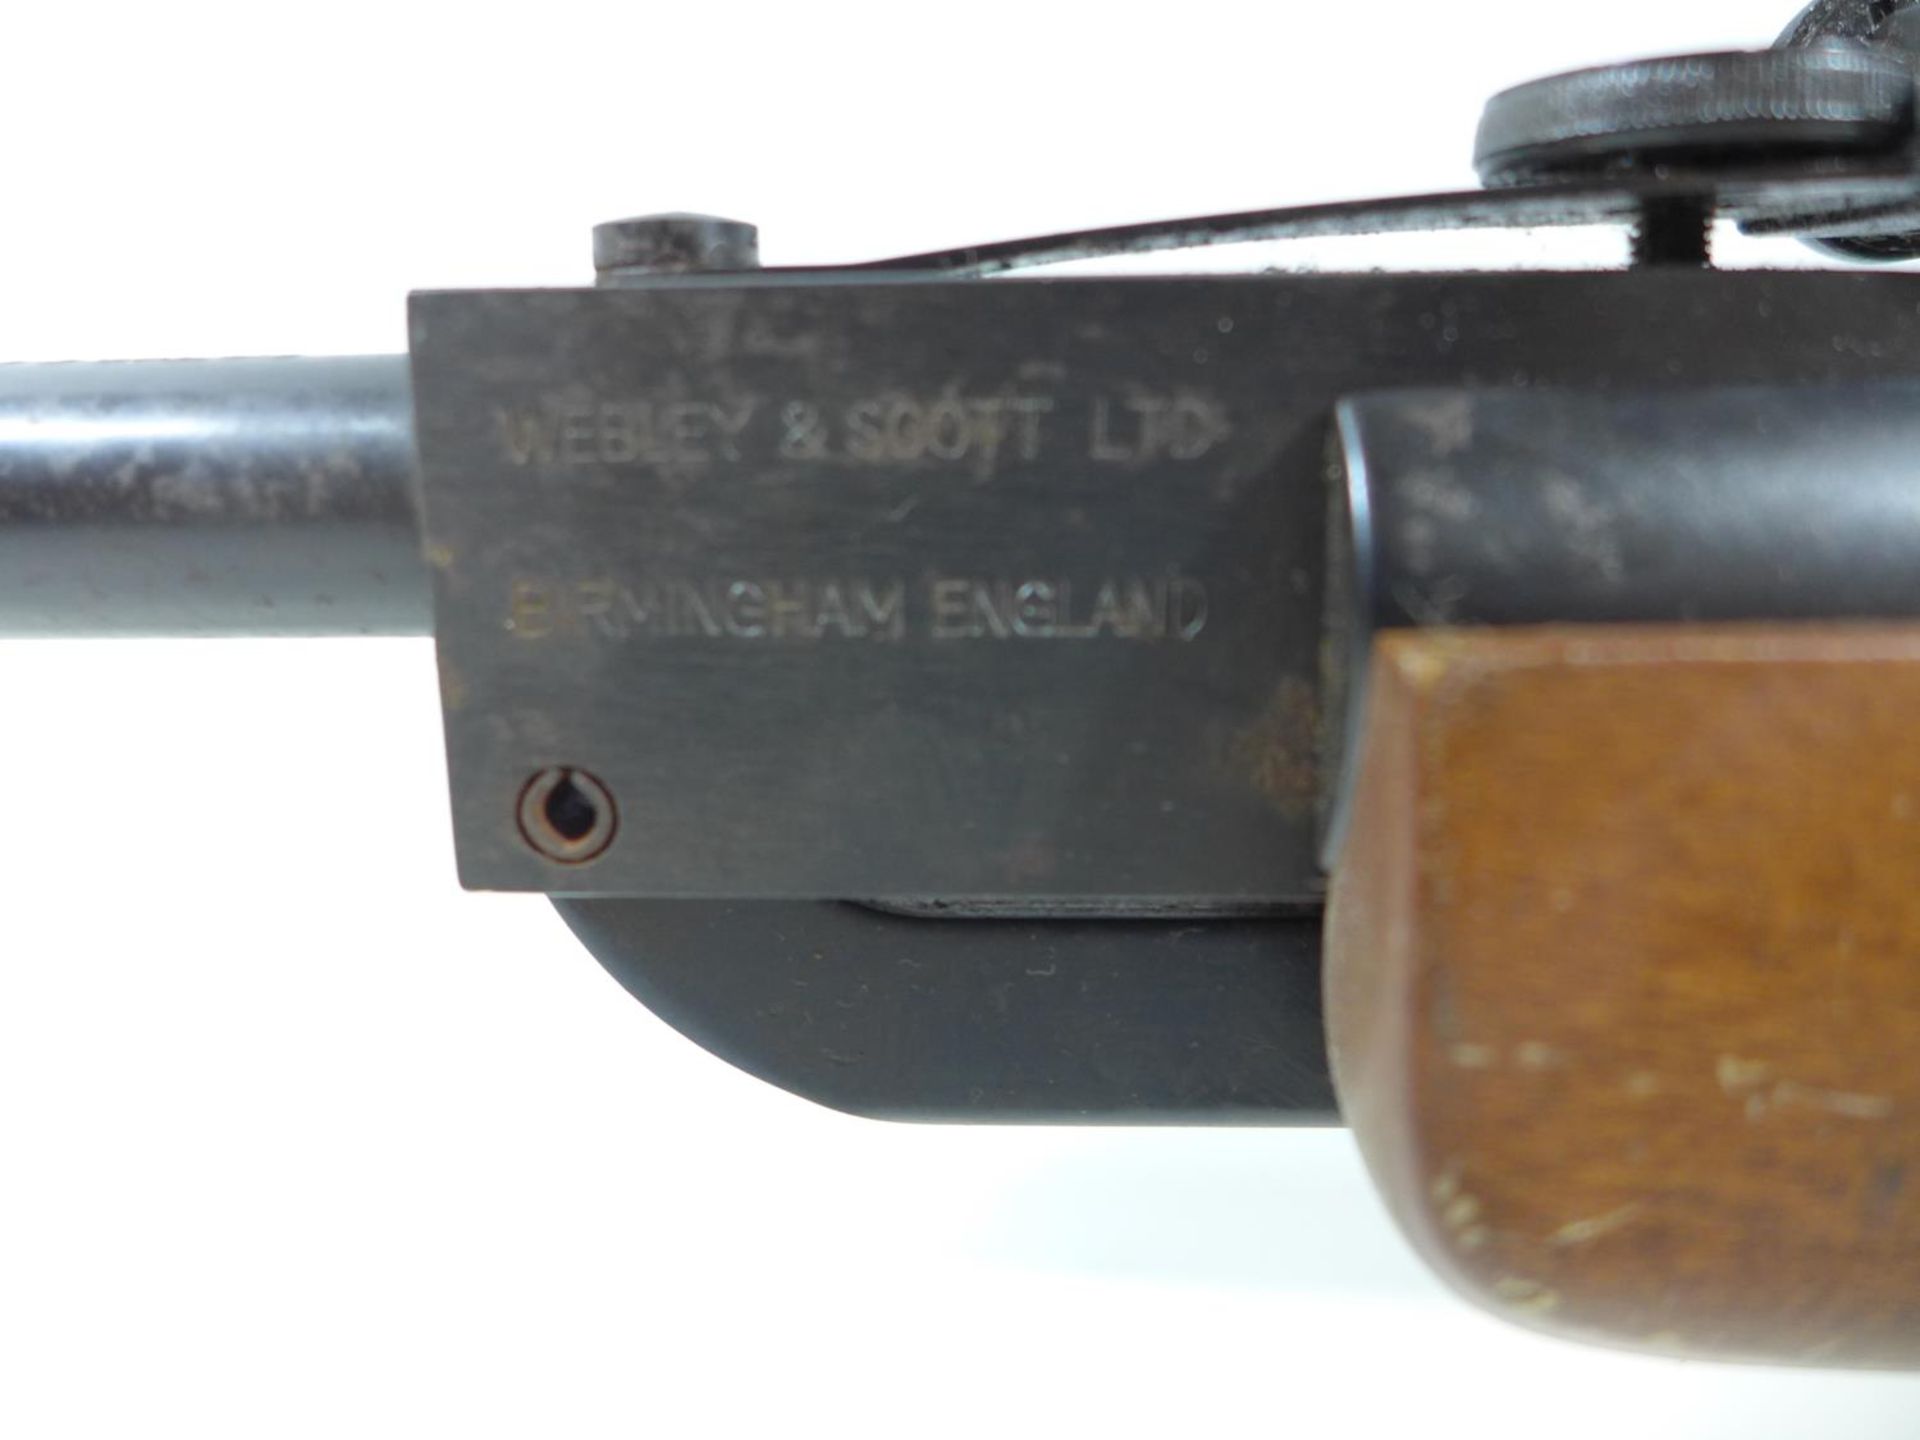 A WEBLEY AND SCOTT EXCEL .22 CALIBRE AIR RIFLE, 44CM BARREL, SERIAL NUMBER 831825, FITTED WITH - Image 5 of 7